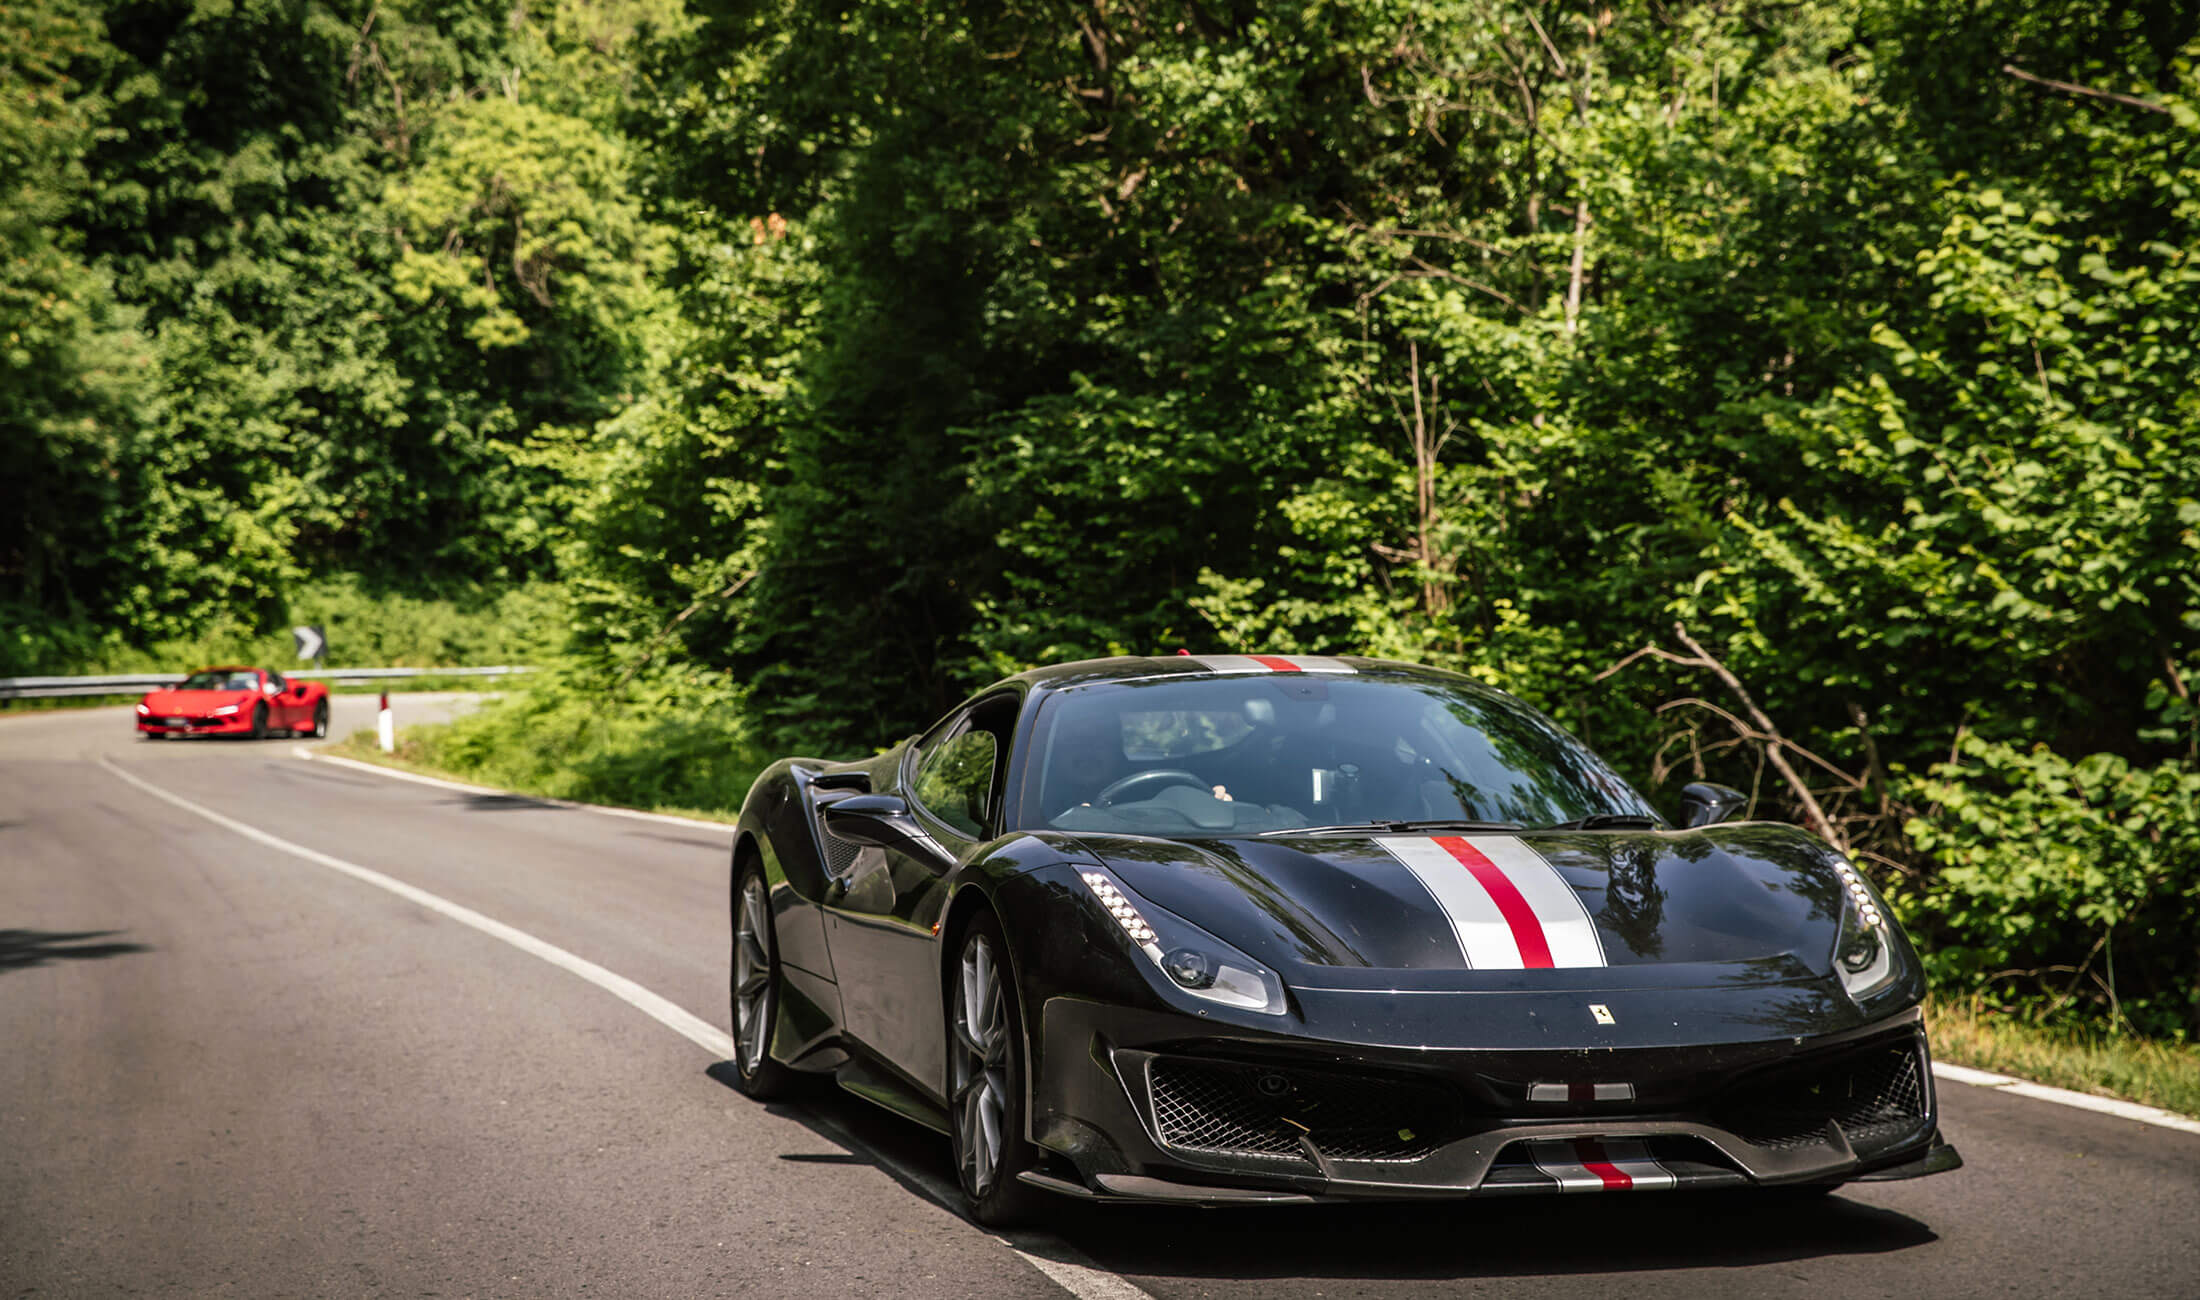 Black Ferrari with stripes in front of red Ferrari on country road in France